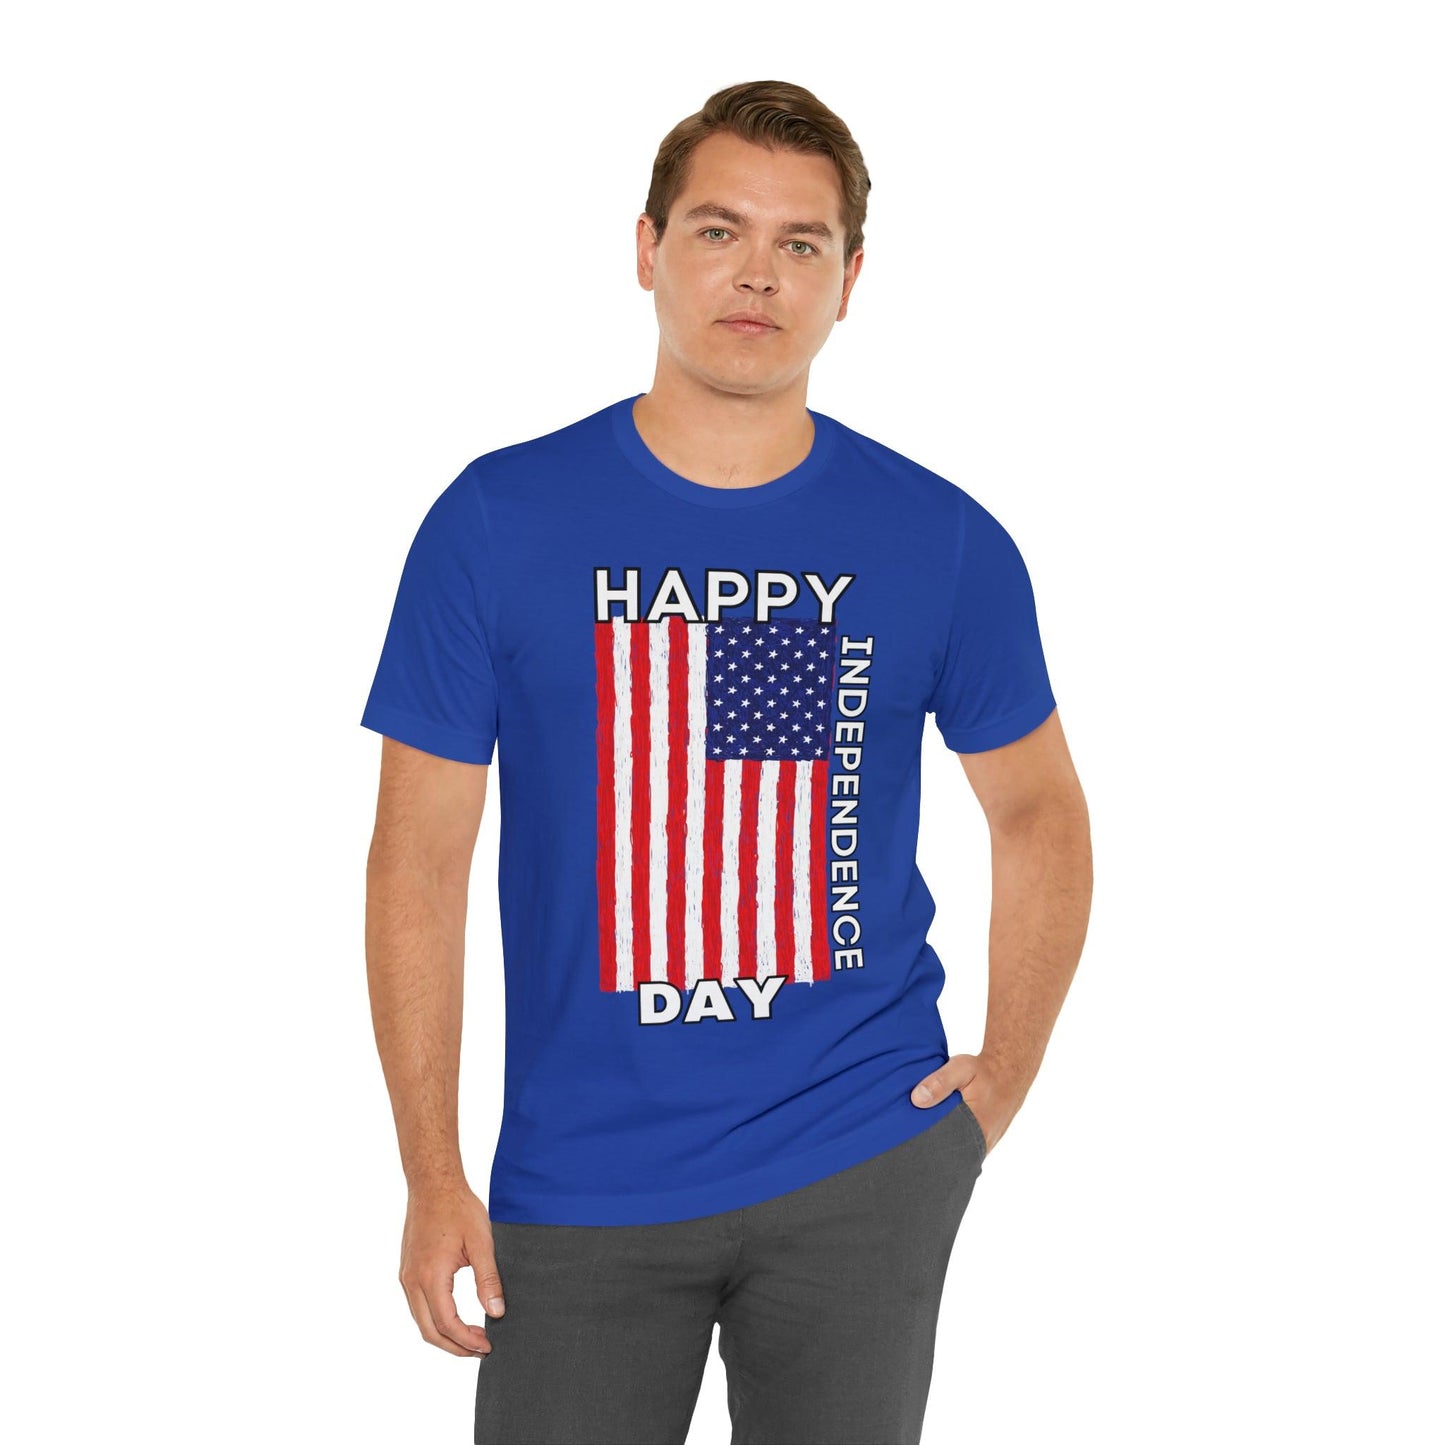 Show Your Patriotism with USA Flag Shirts: Independence Day, Fireworks, Freedom - Perfect for Women and Men on 4th of July